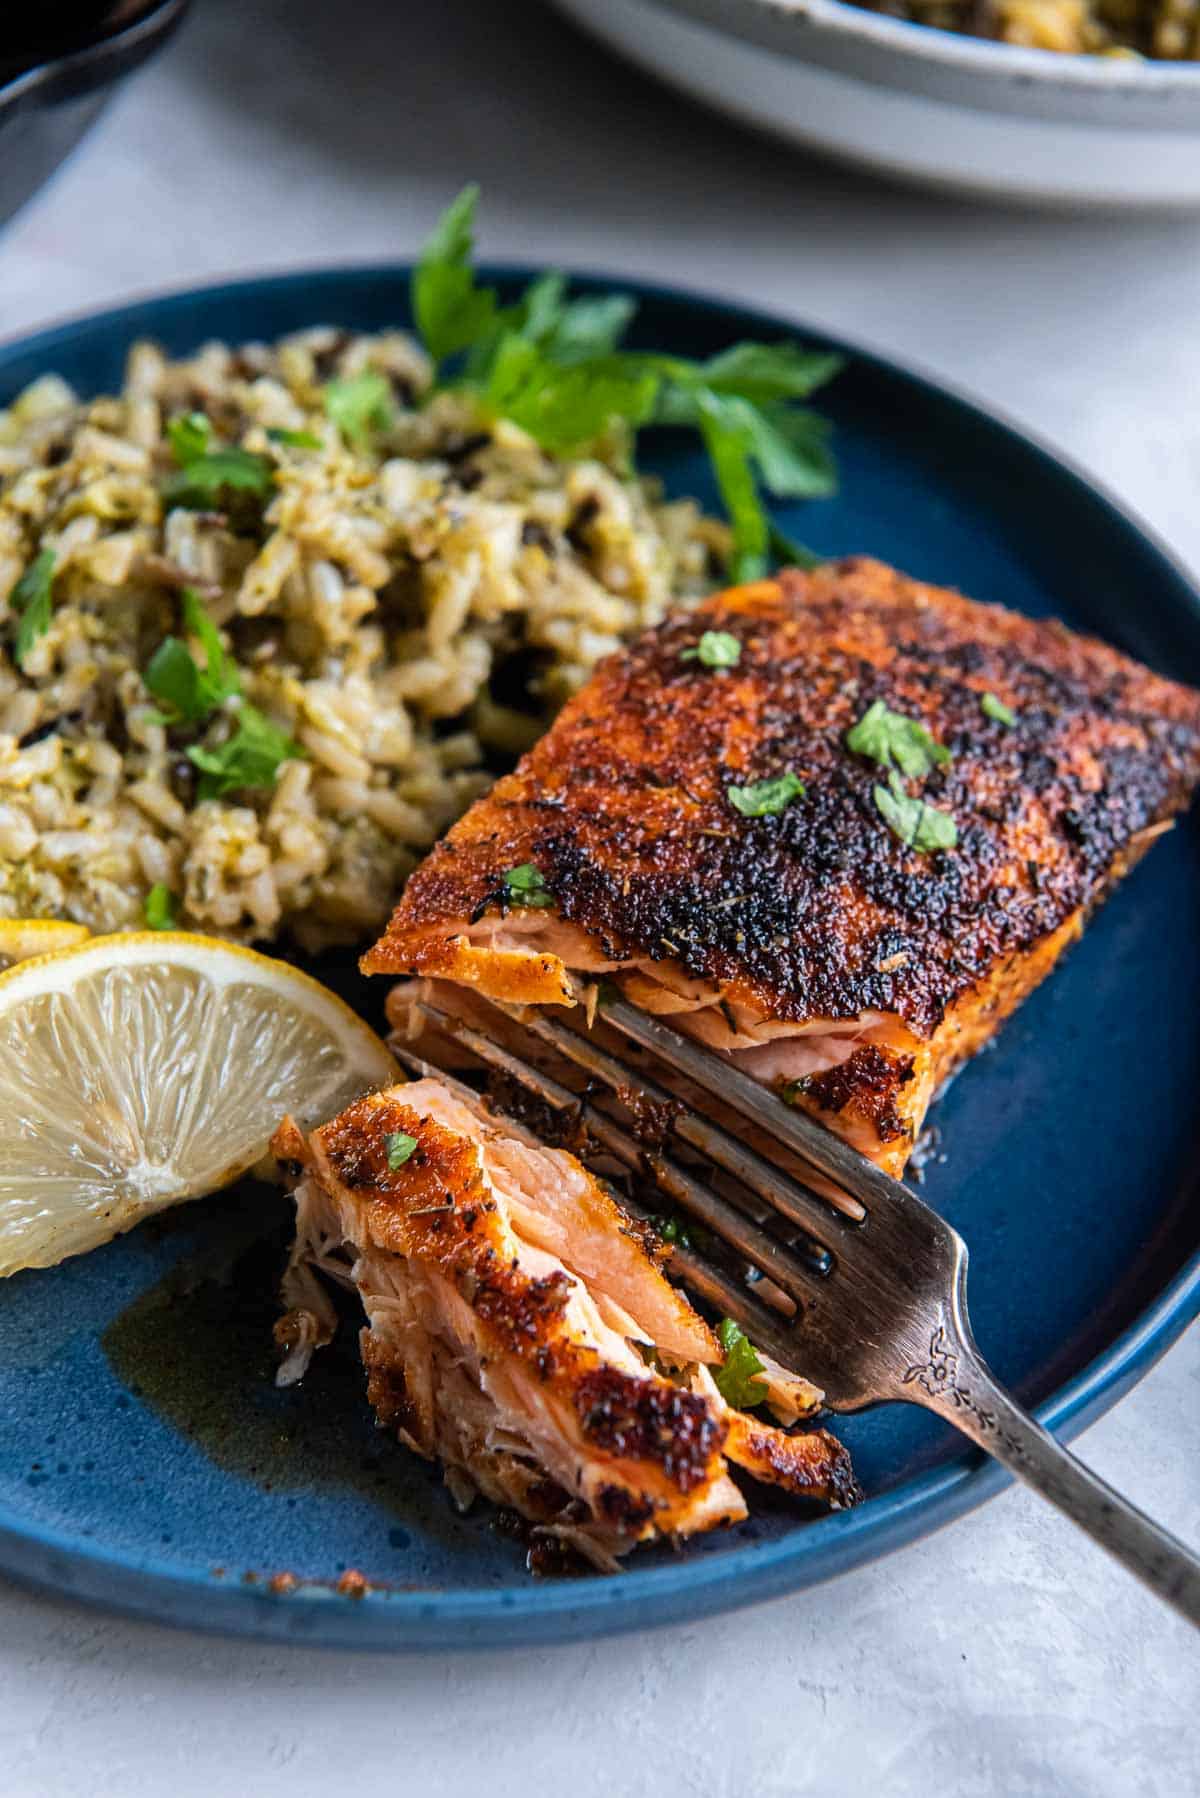 A fork breaking into a piece of blackened salmon a blue plate.